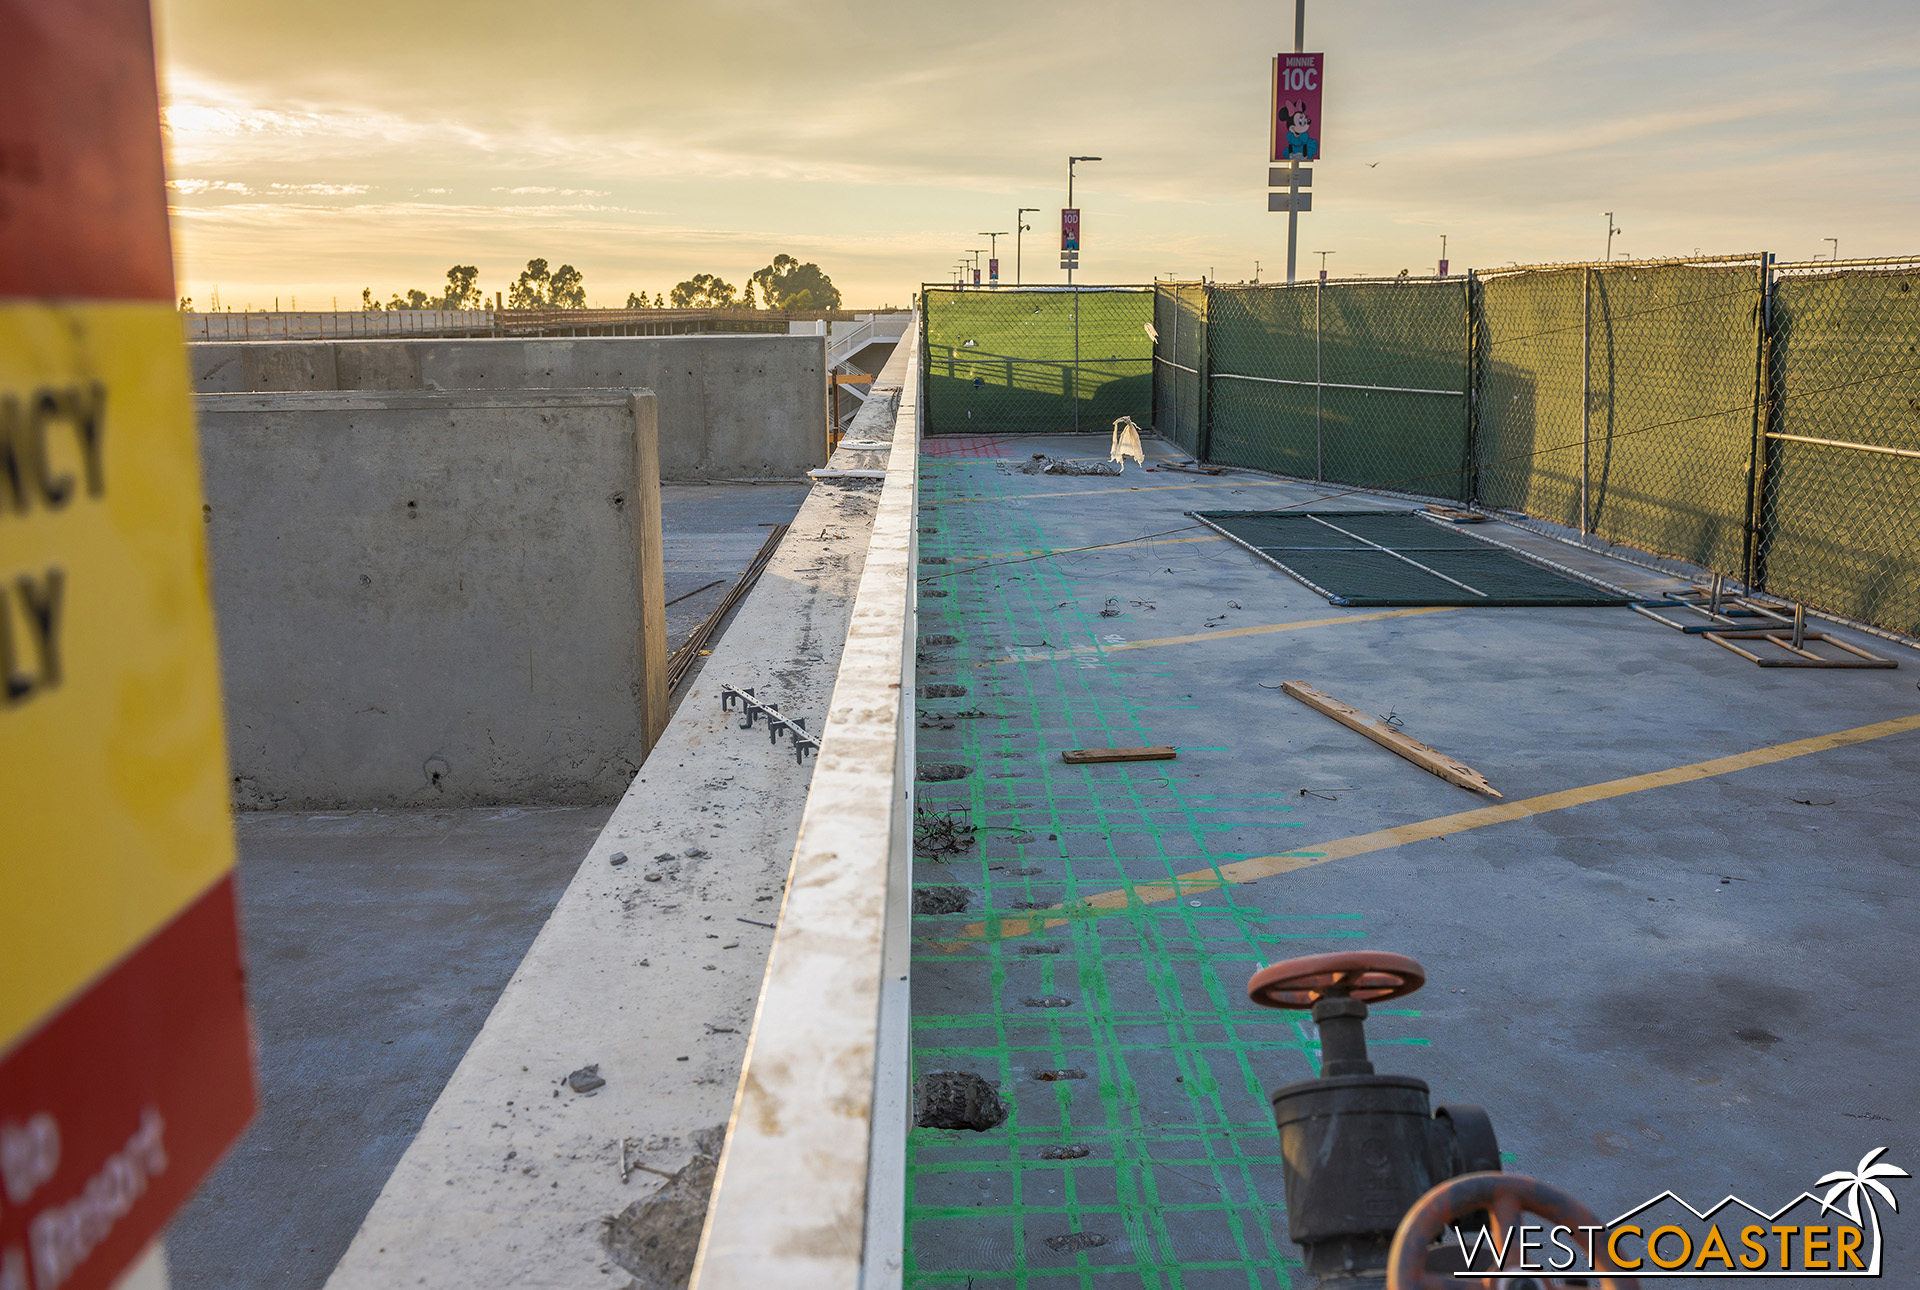  Over here, the rebar within the existing structure has been x-rayed and traced out so that when they cut out the existing parking structure wall and cut into the deck, they know just what reinforcement is being impacted. 